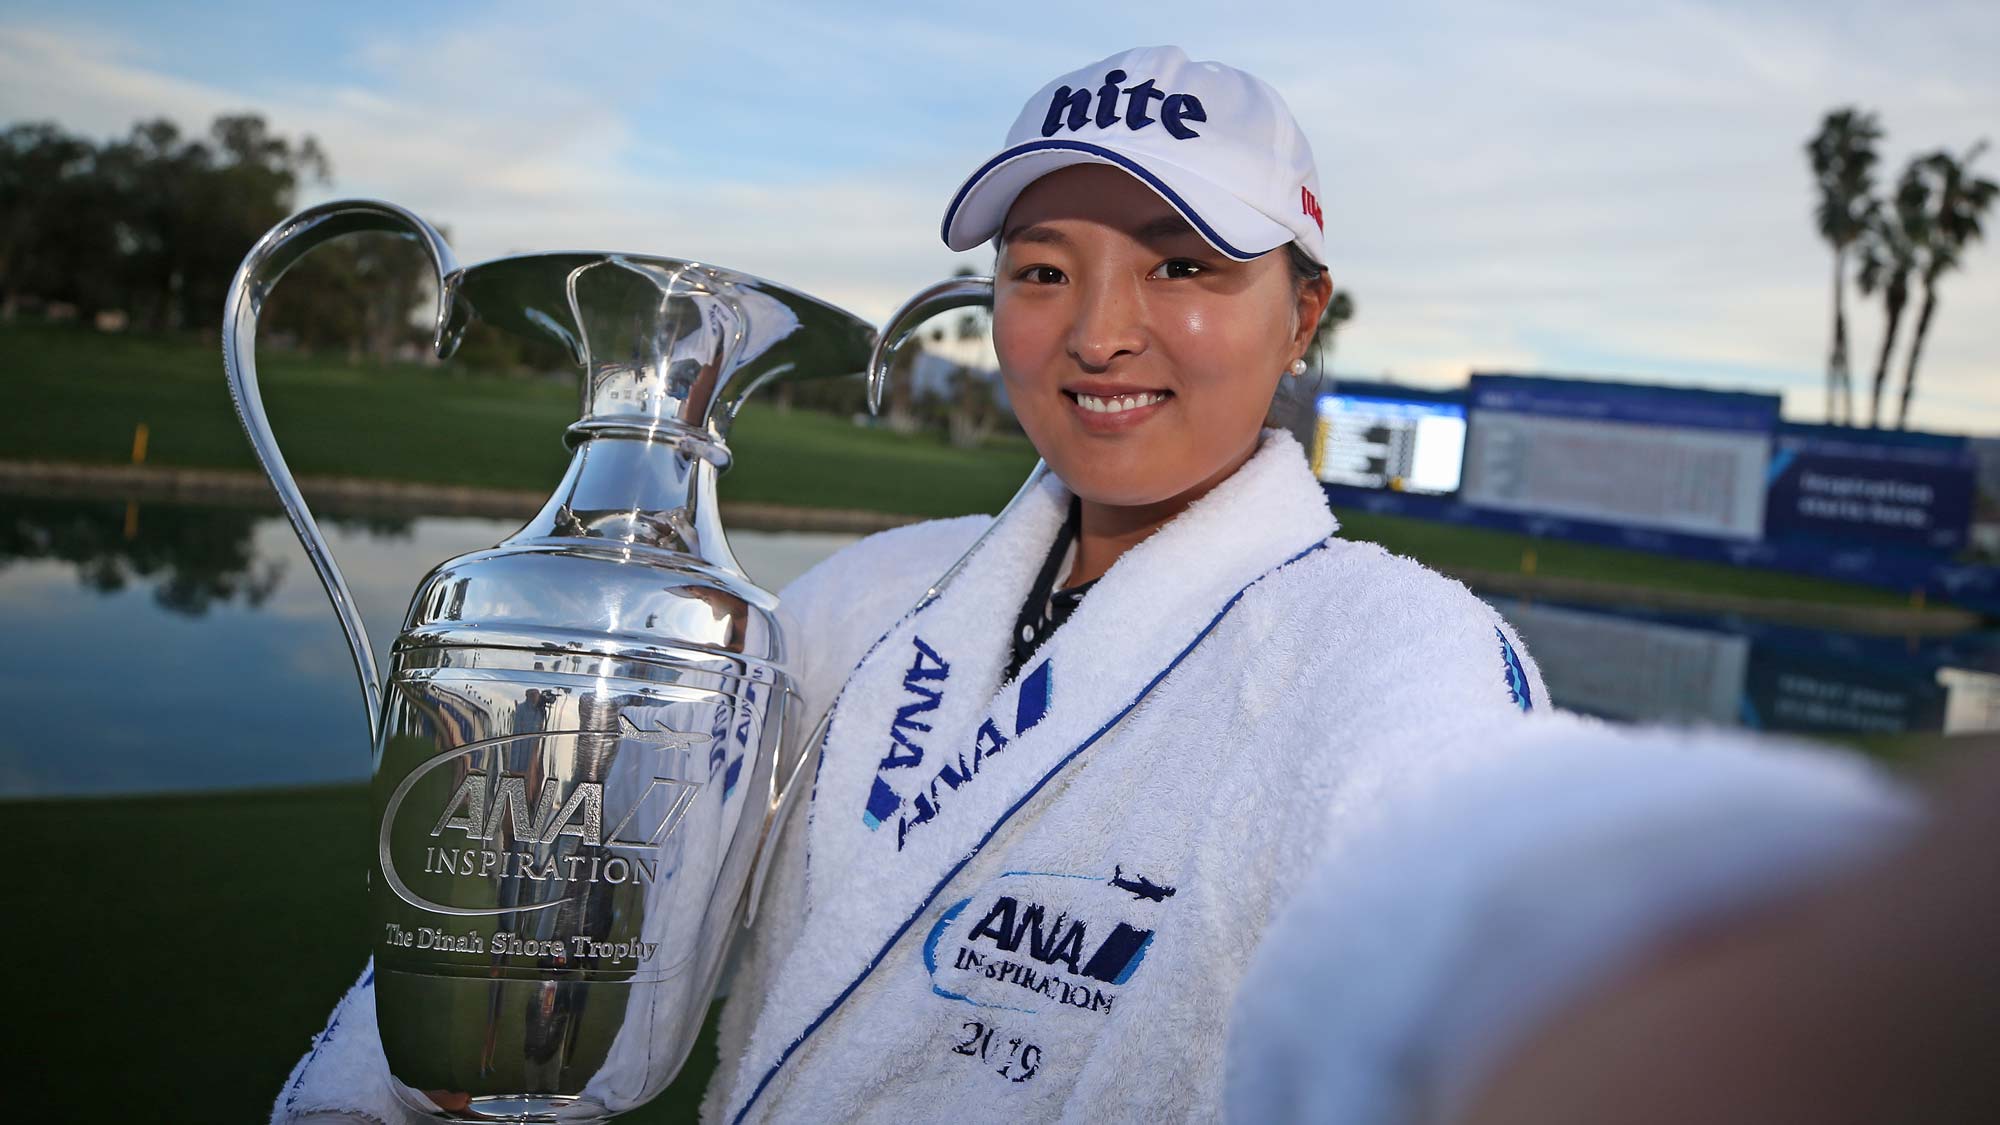 Jin Young Ko has her #BagsPacked for the 2020 Diamond Resorts Tournament of Champions after her victory at the 2019 ANA Inspiration